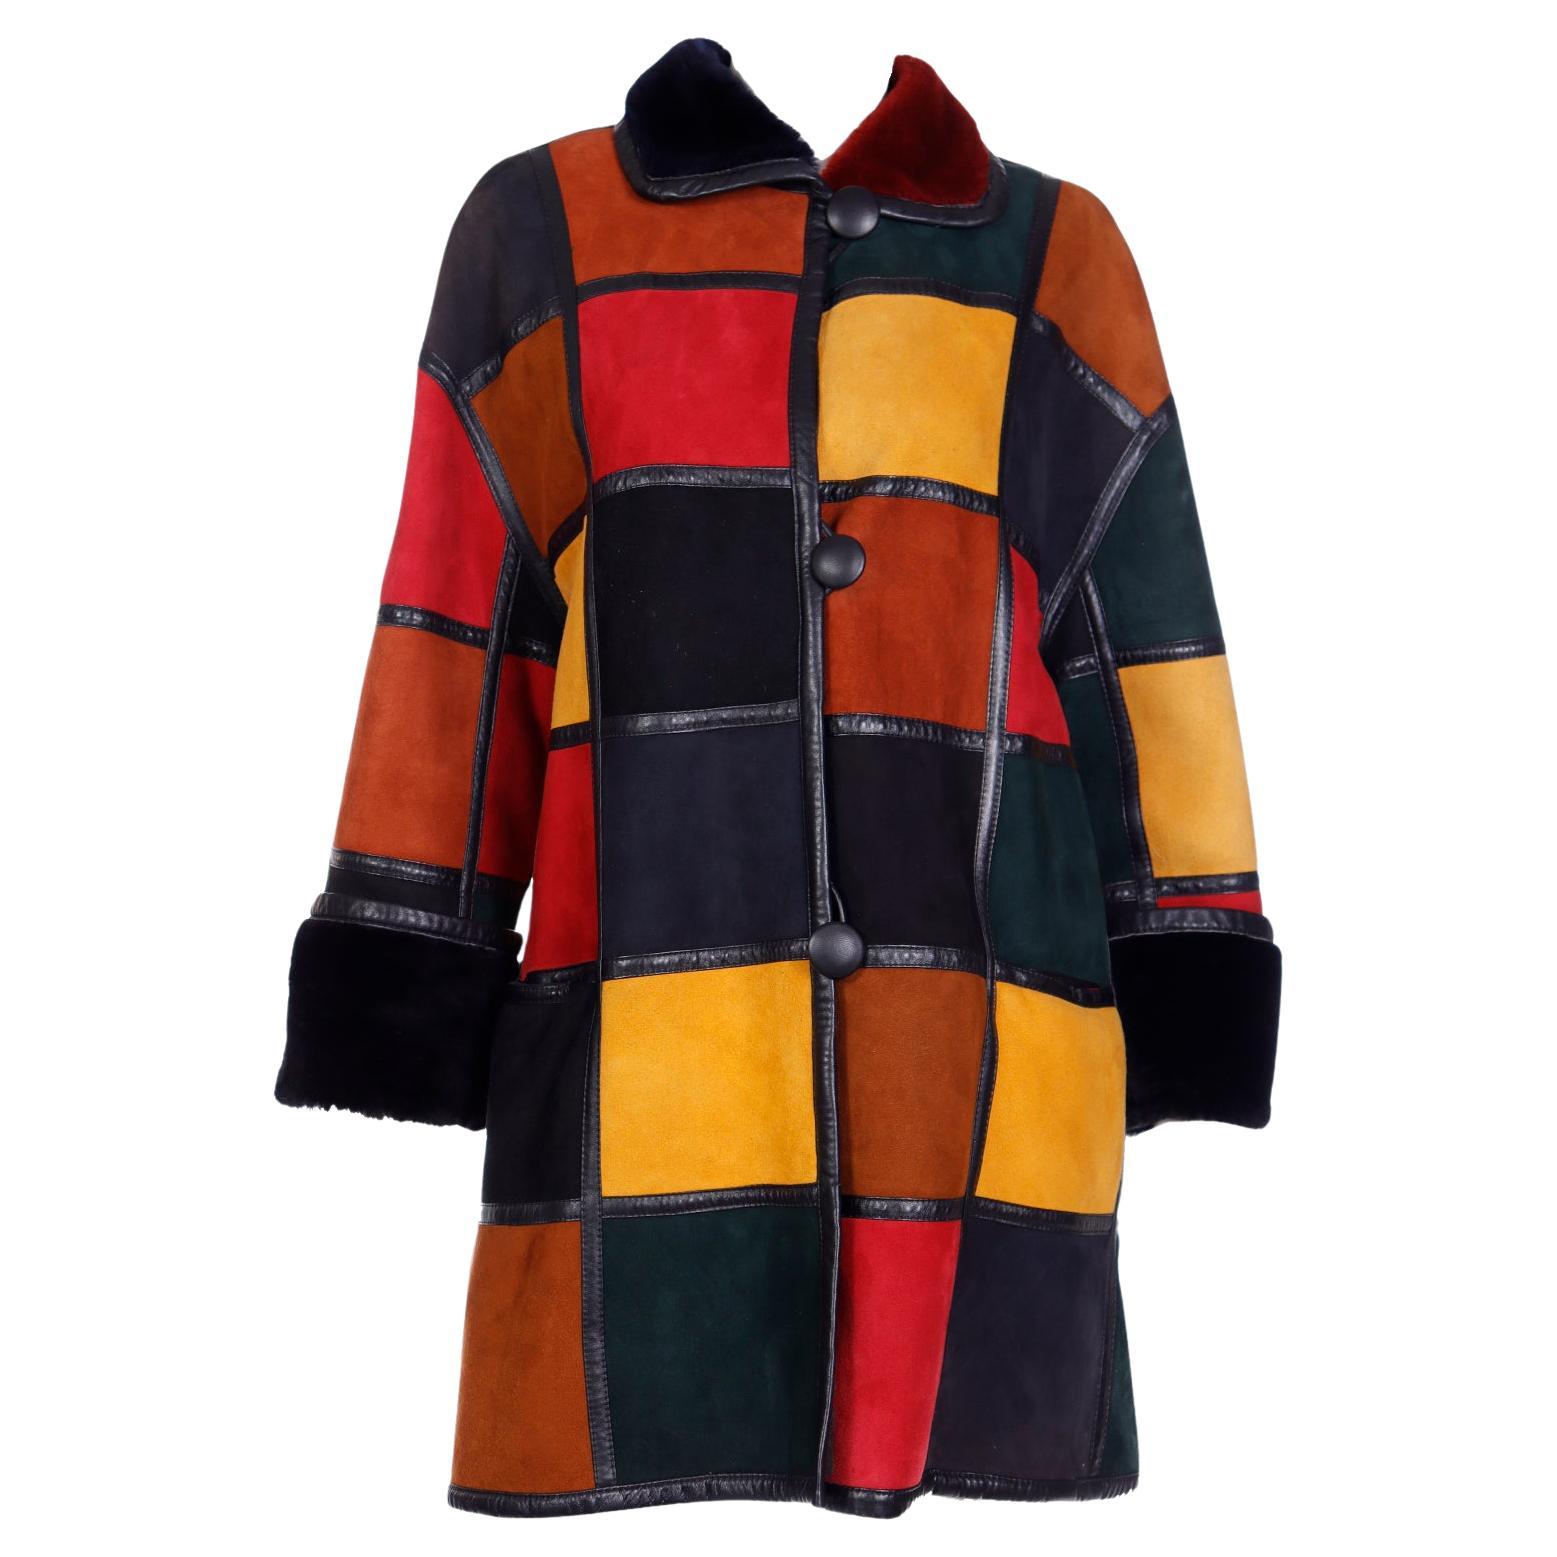 Leather Patchwork Coat - 16 For Sale on 1stDibs